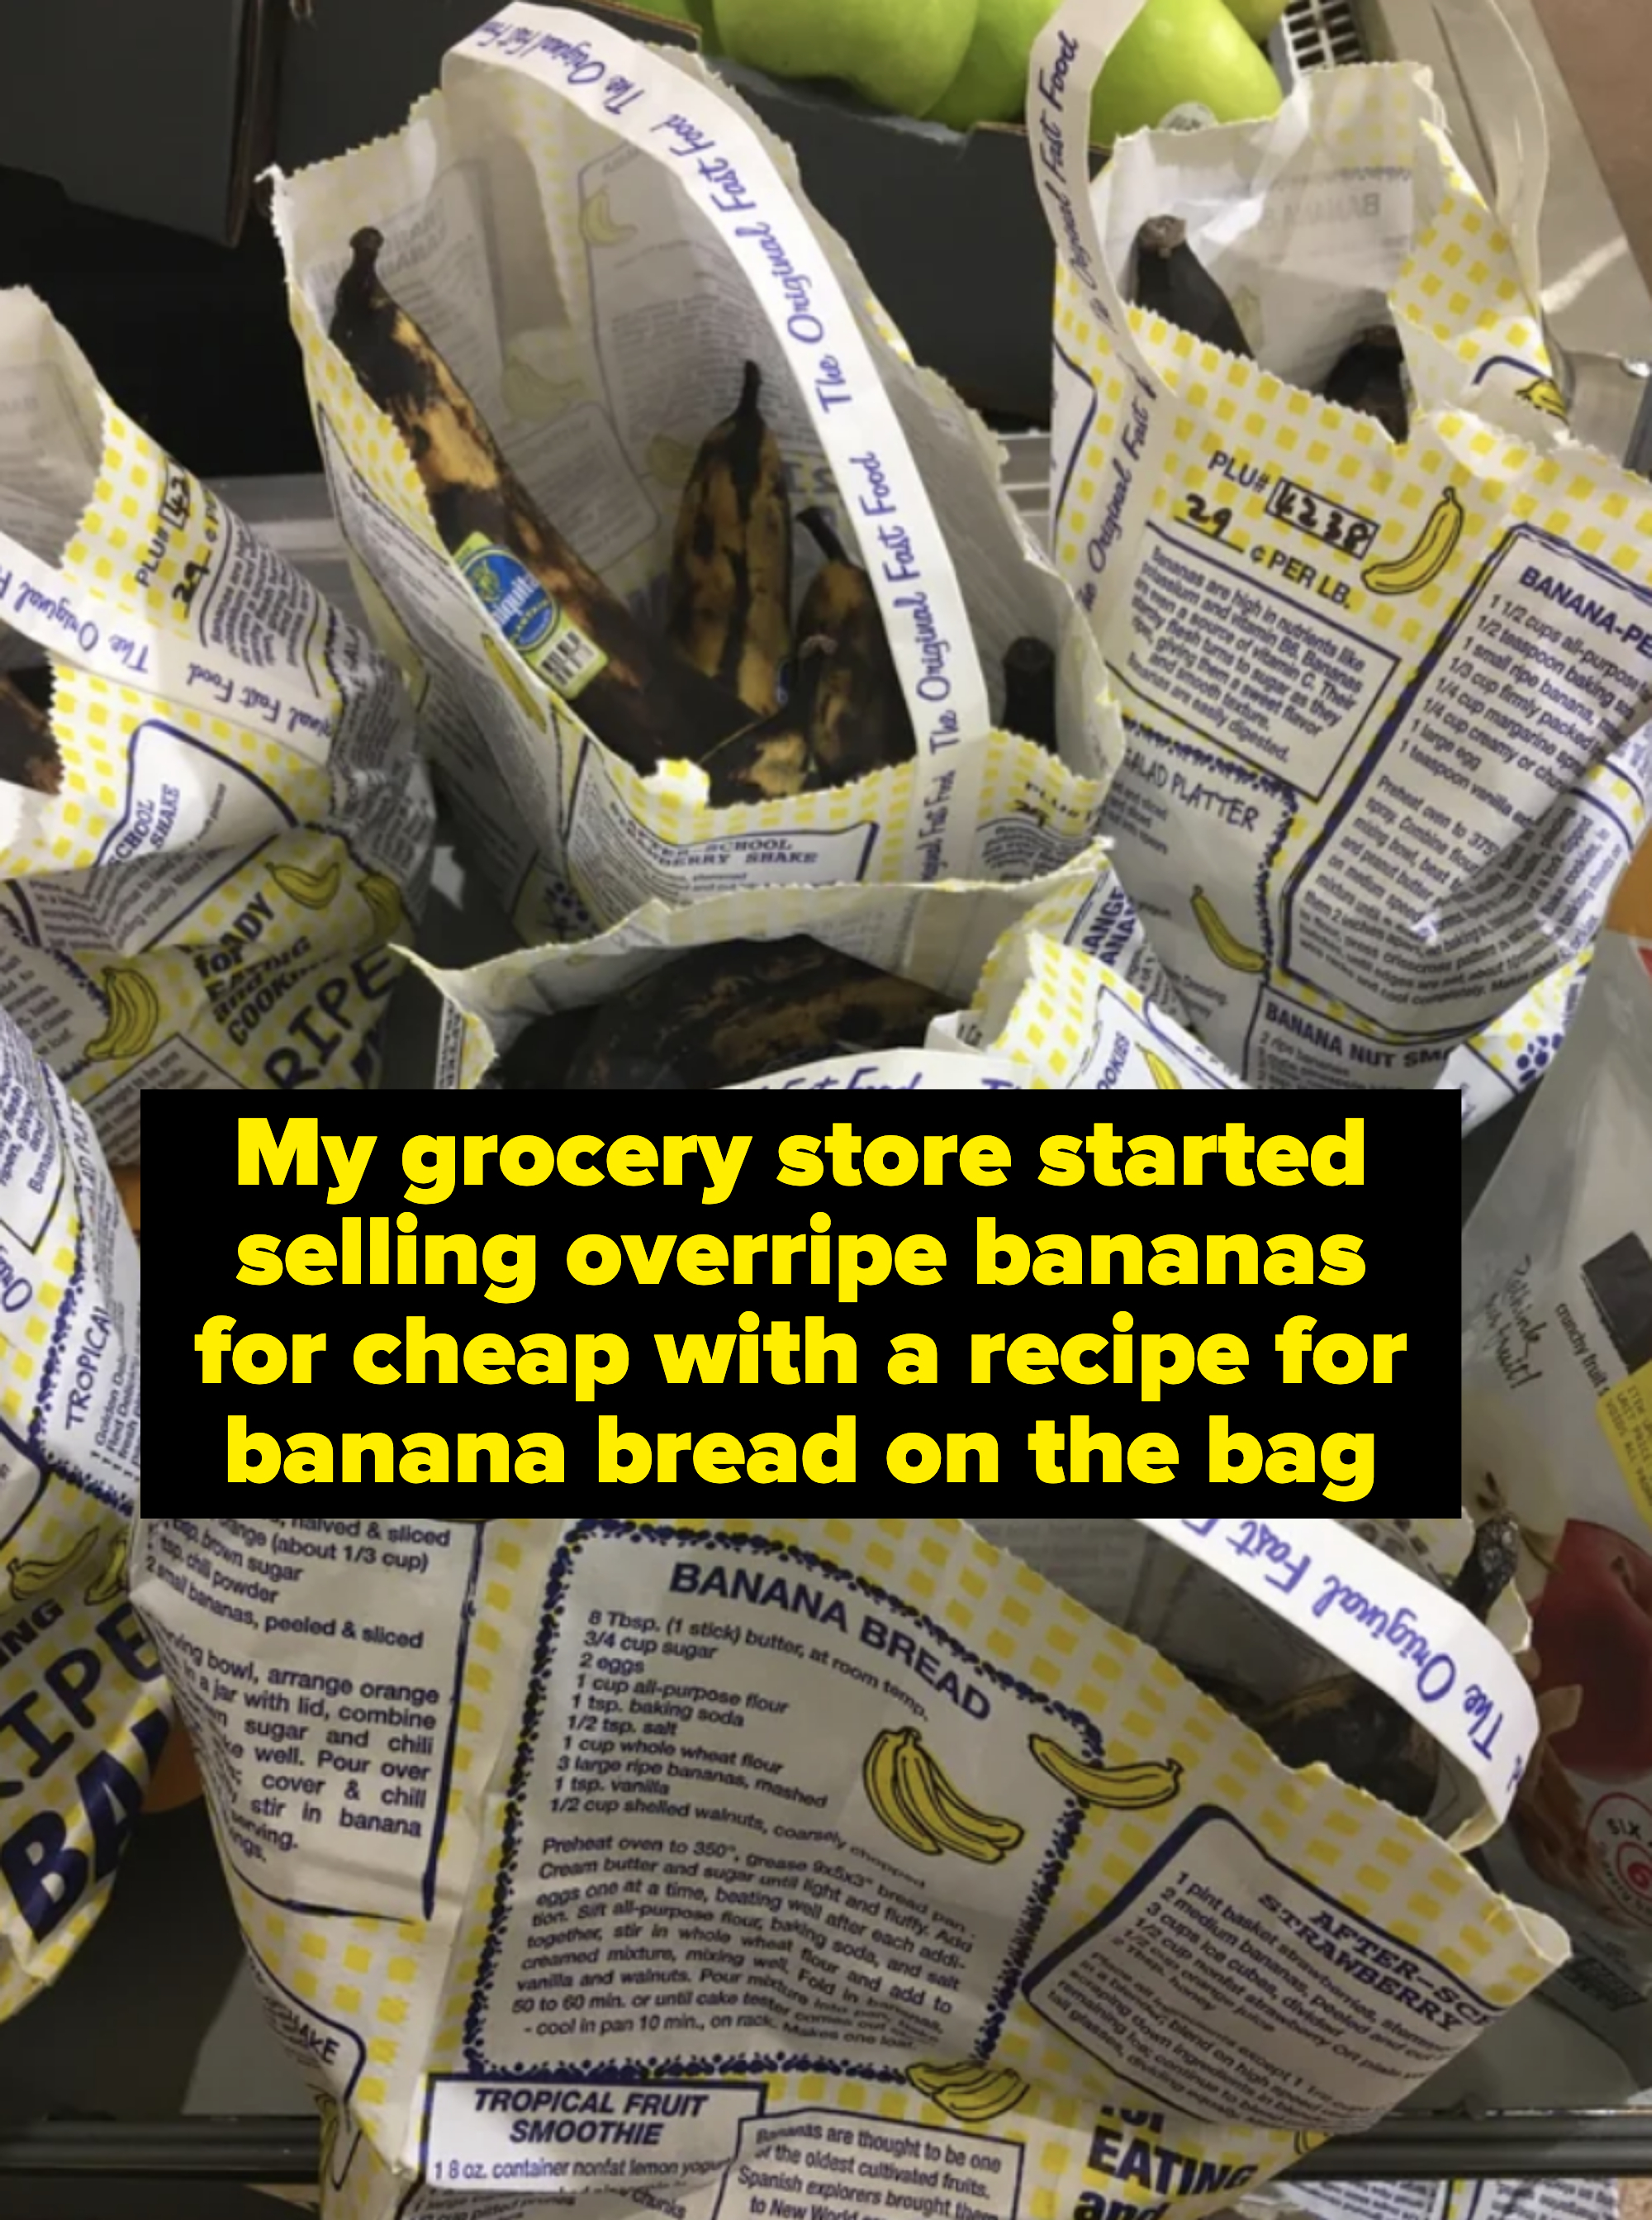 Bananas packaged in bags labeled &quot;Ripe for Banana Bread&quot; in a shopping cart, internet humor shown